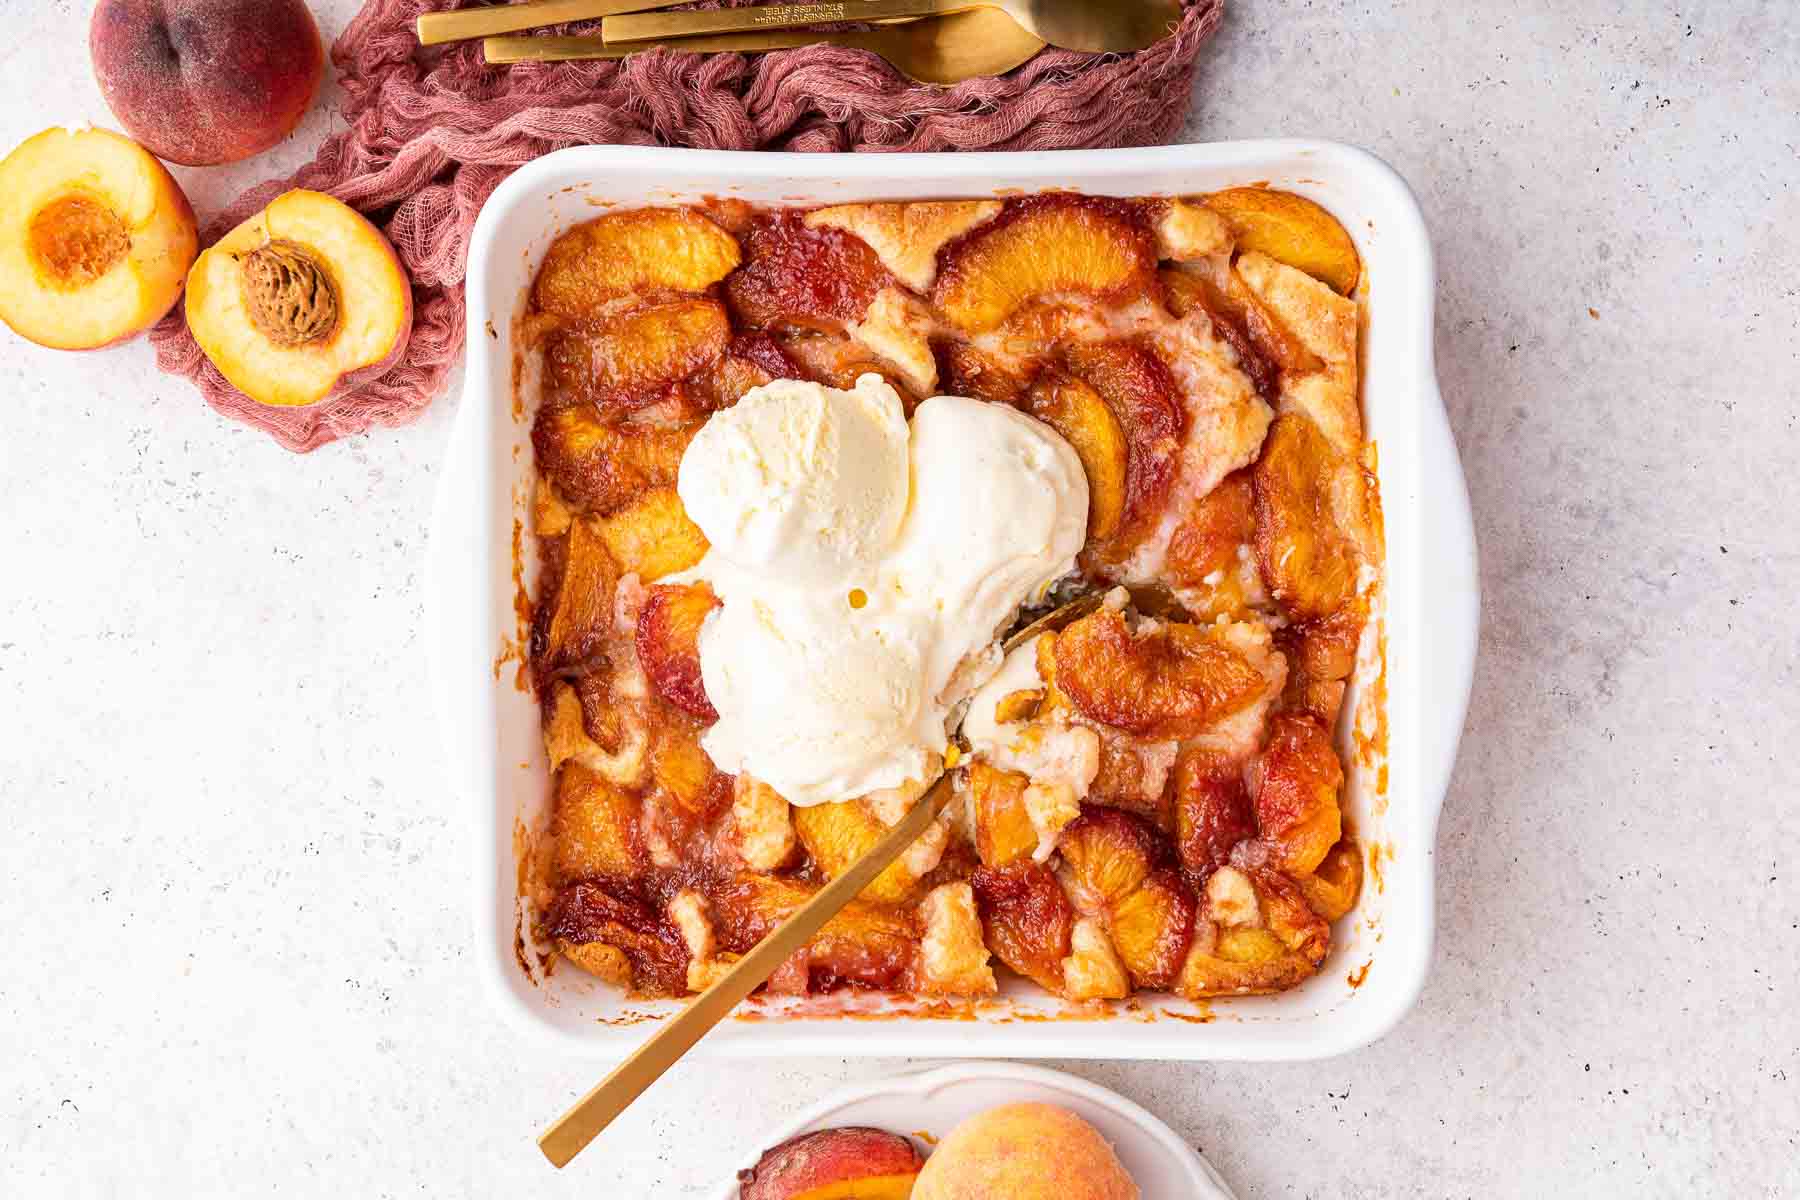 Freshly baked peach cobbler with 3 scoops of white vanilla ice cream on top and gold spoon.